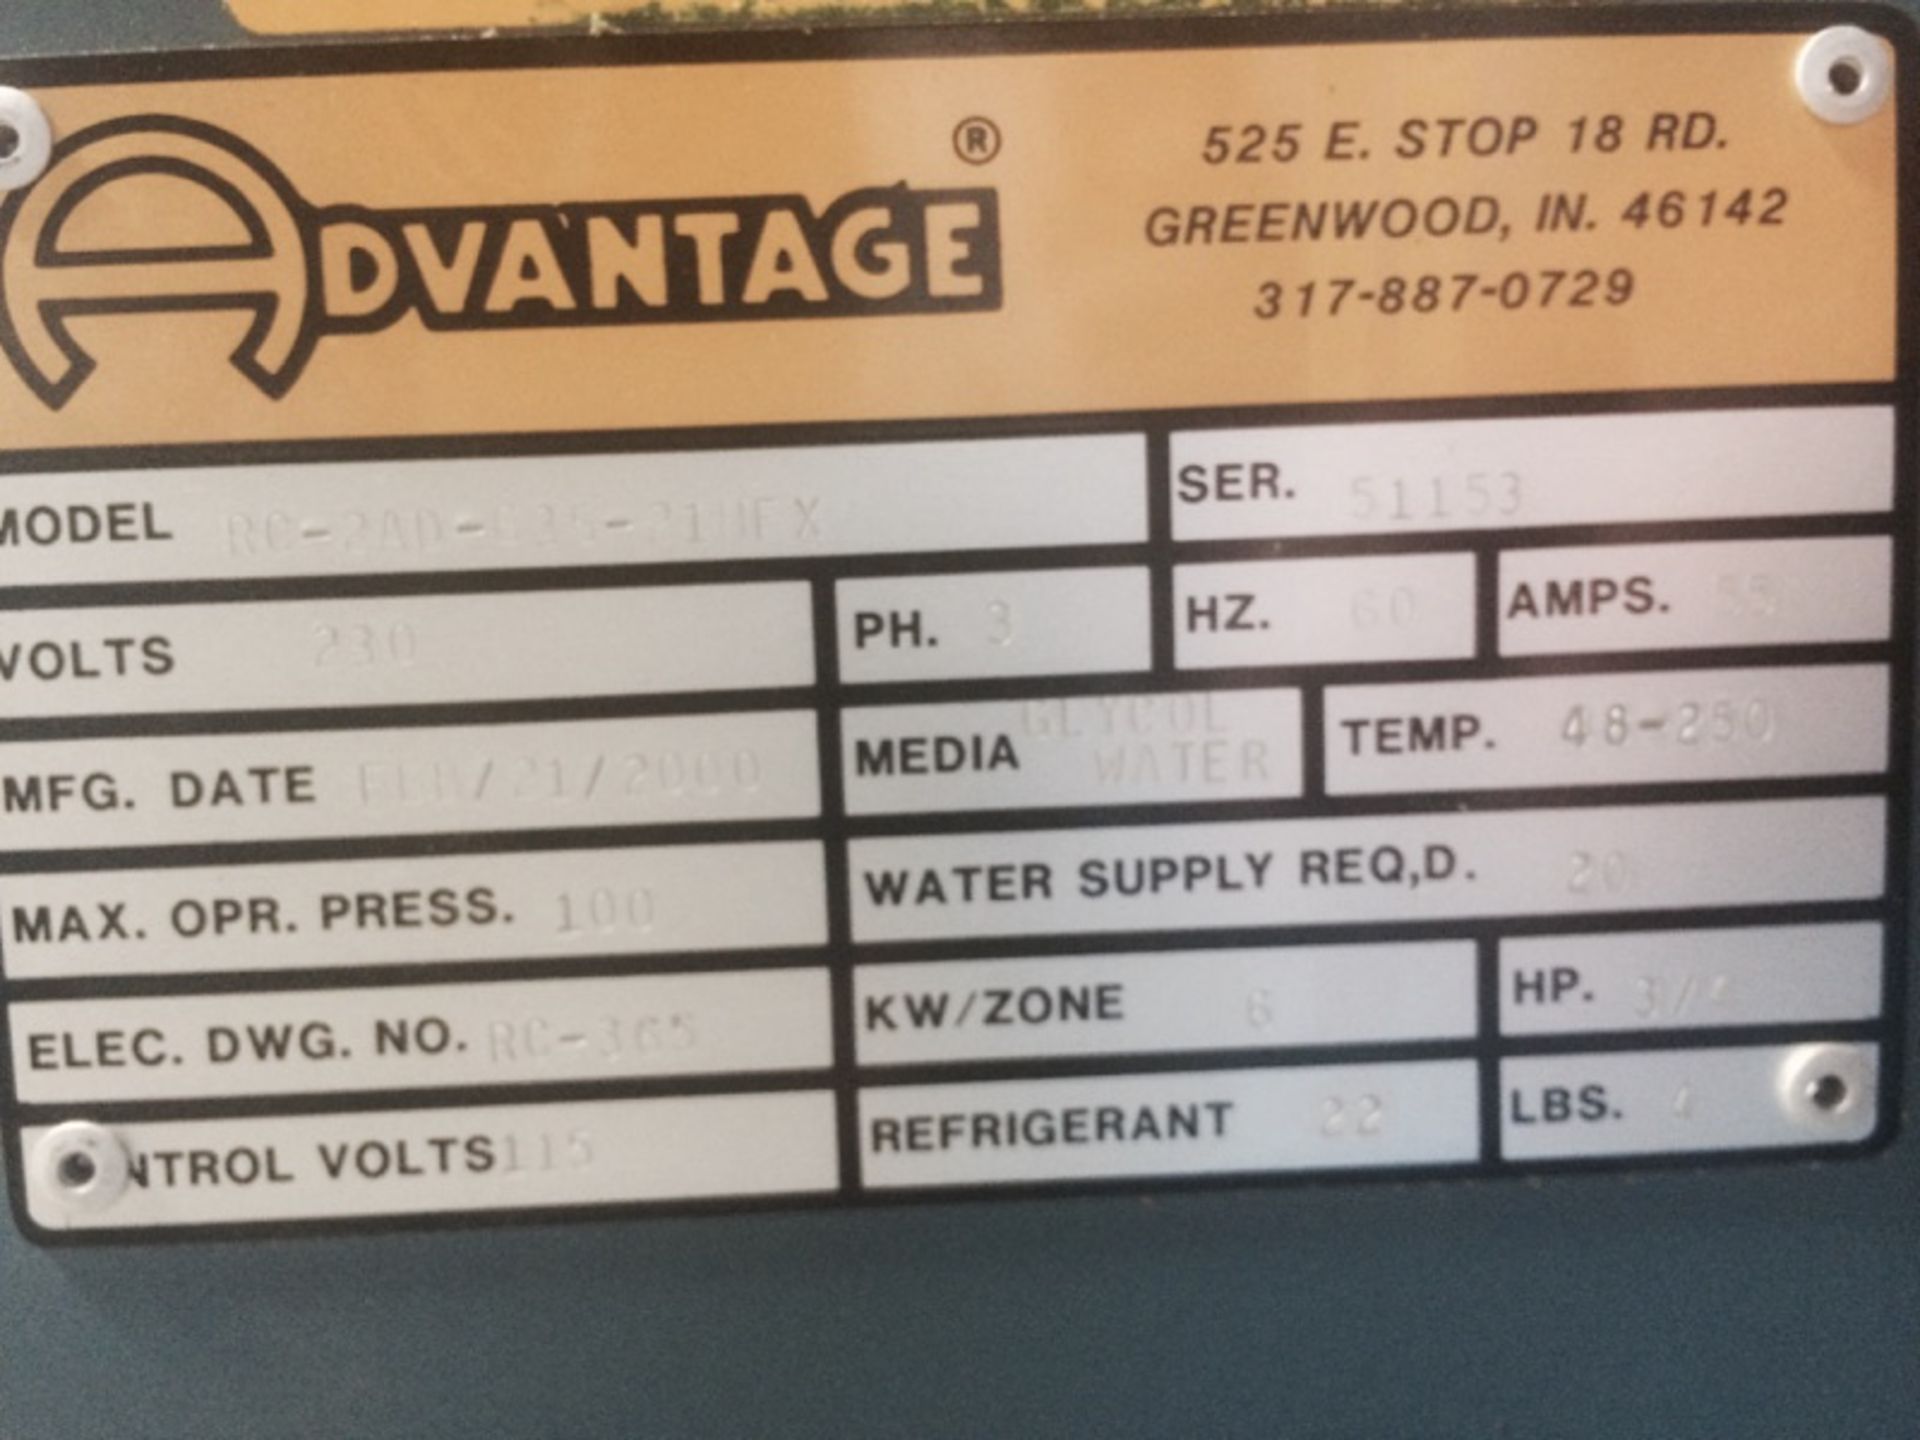 Used Advantage Chiller, Model RC-2AD-635-21HFX, 2 Ton Capacity, Media Glycol/Water, Rated 100 psi, - Image 4 of 4